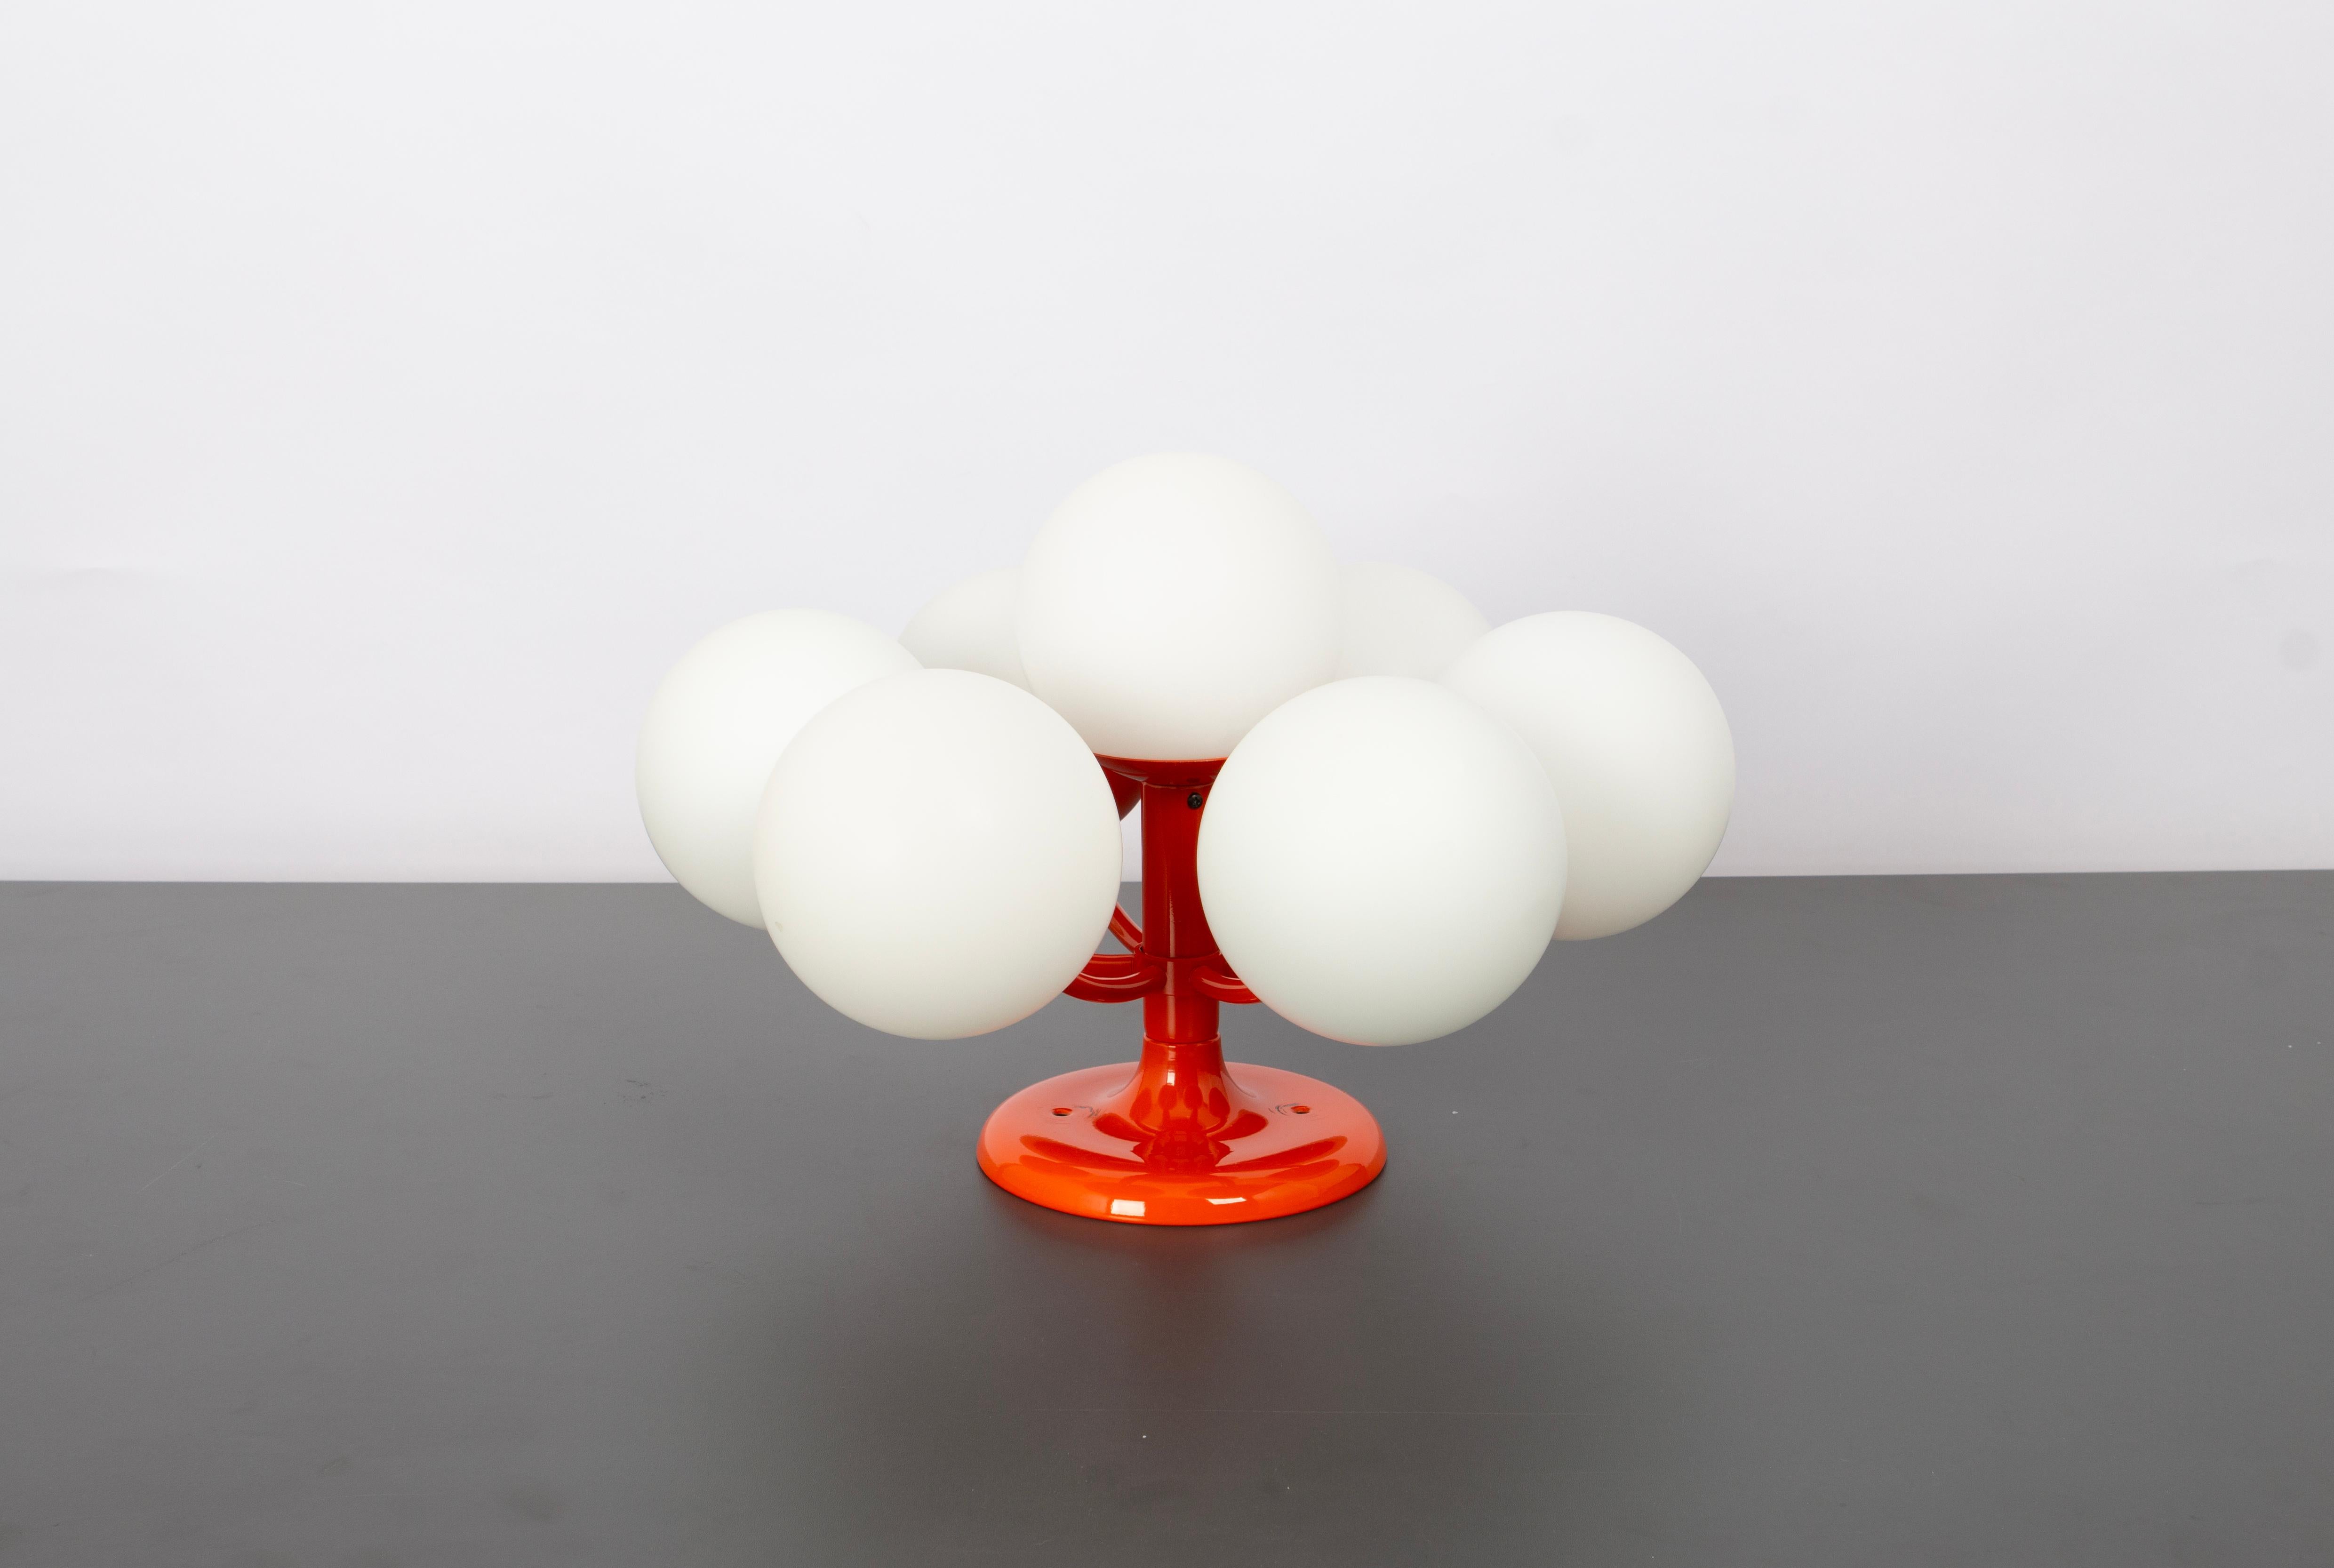 Midcentury vintage ceiling or wall light in orange color made by Kaiser Leuchten, Germany with 6 opal glass balls.
High quality and in very good condition. Cleaned, well-wired, and ready to use. 

The fixture requires 6 x E14 small bulbs with 40W